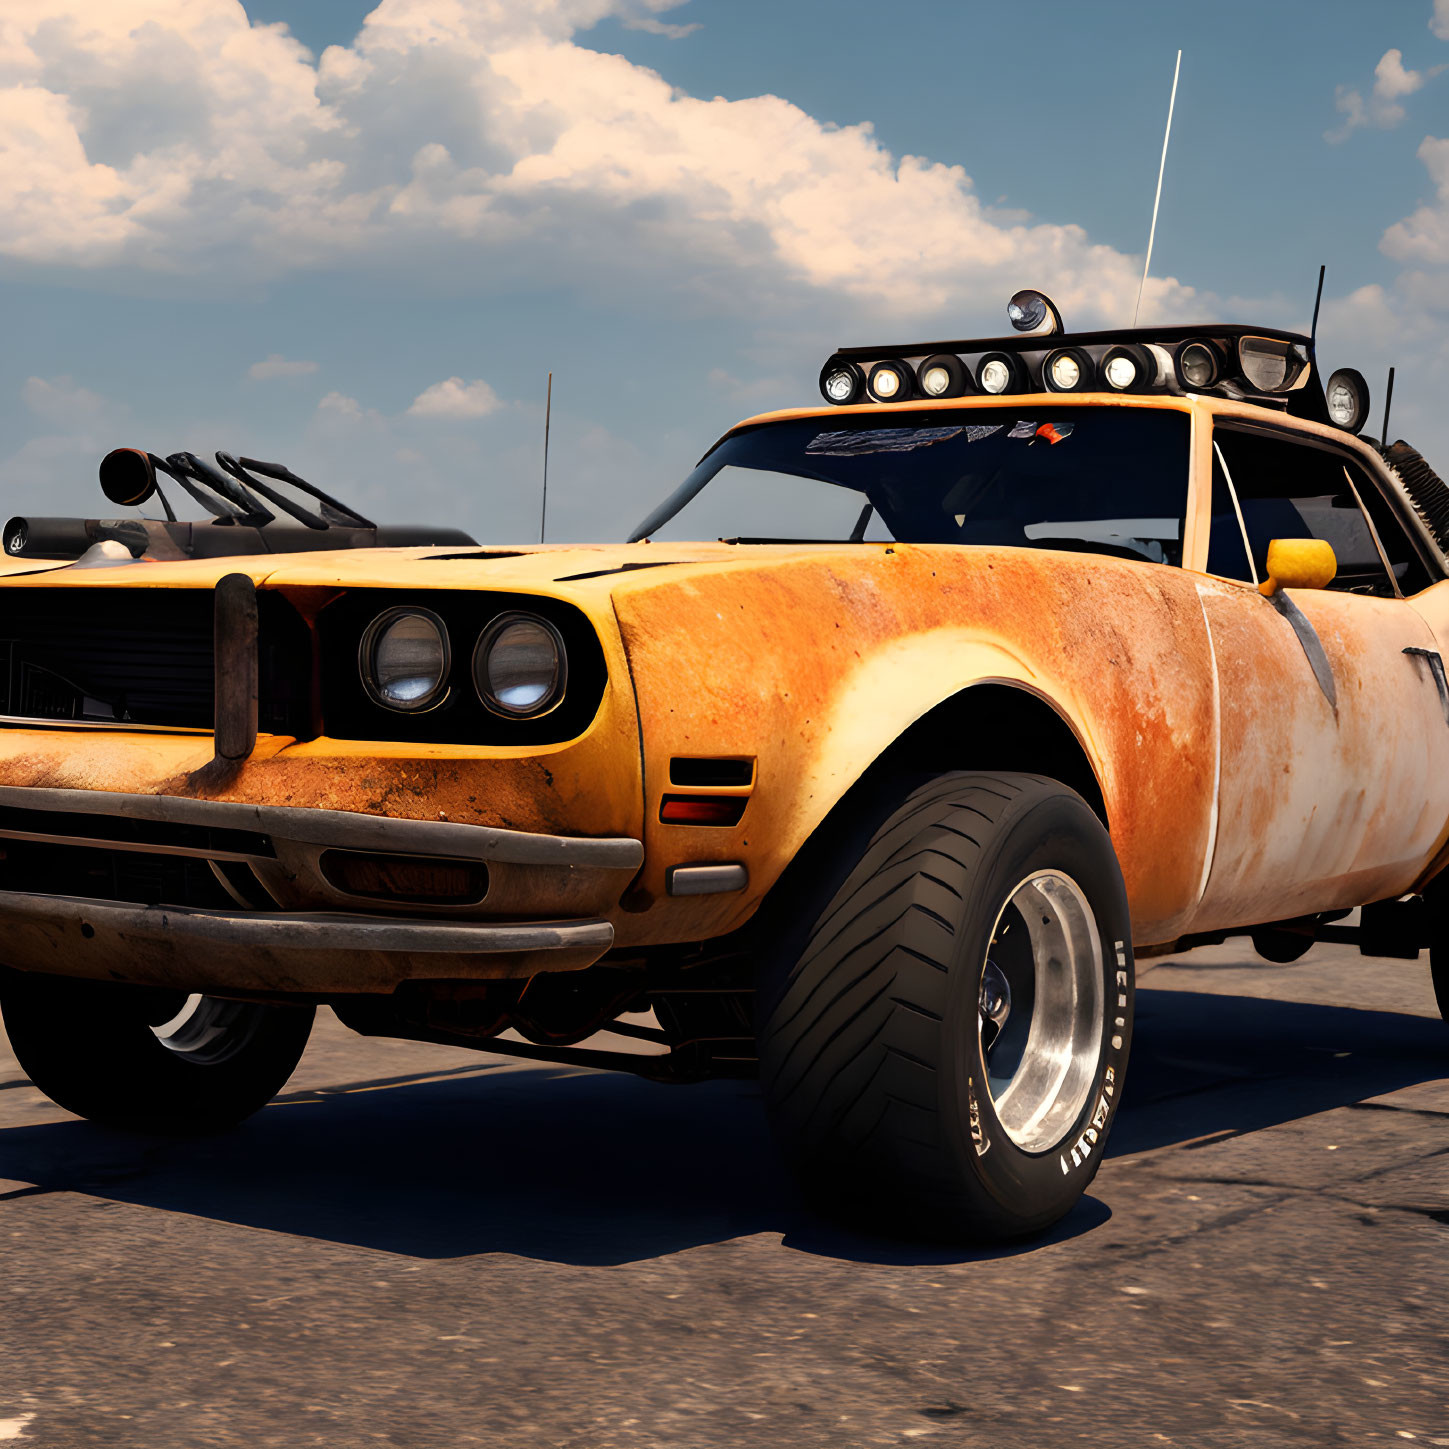 Vintage Yellow Muscle Car with Off-Road Mods in Desert Setting